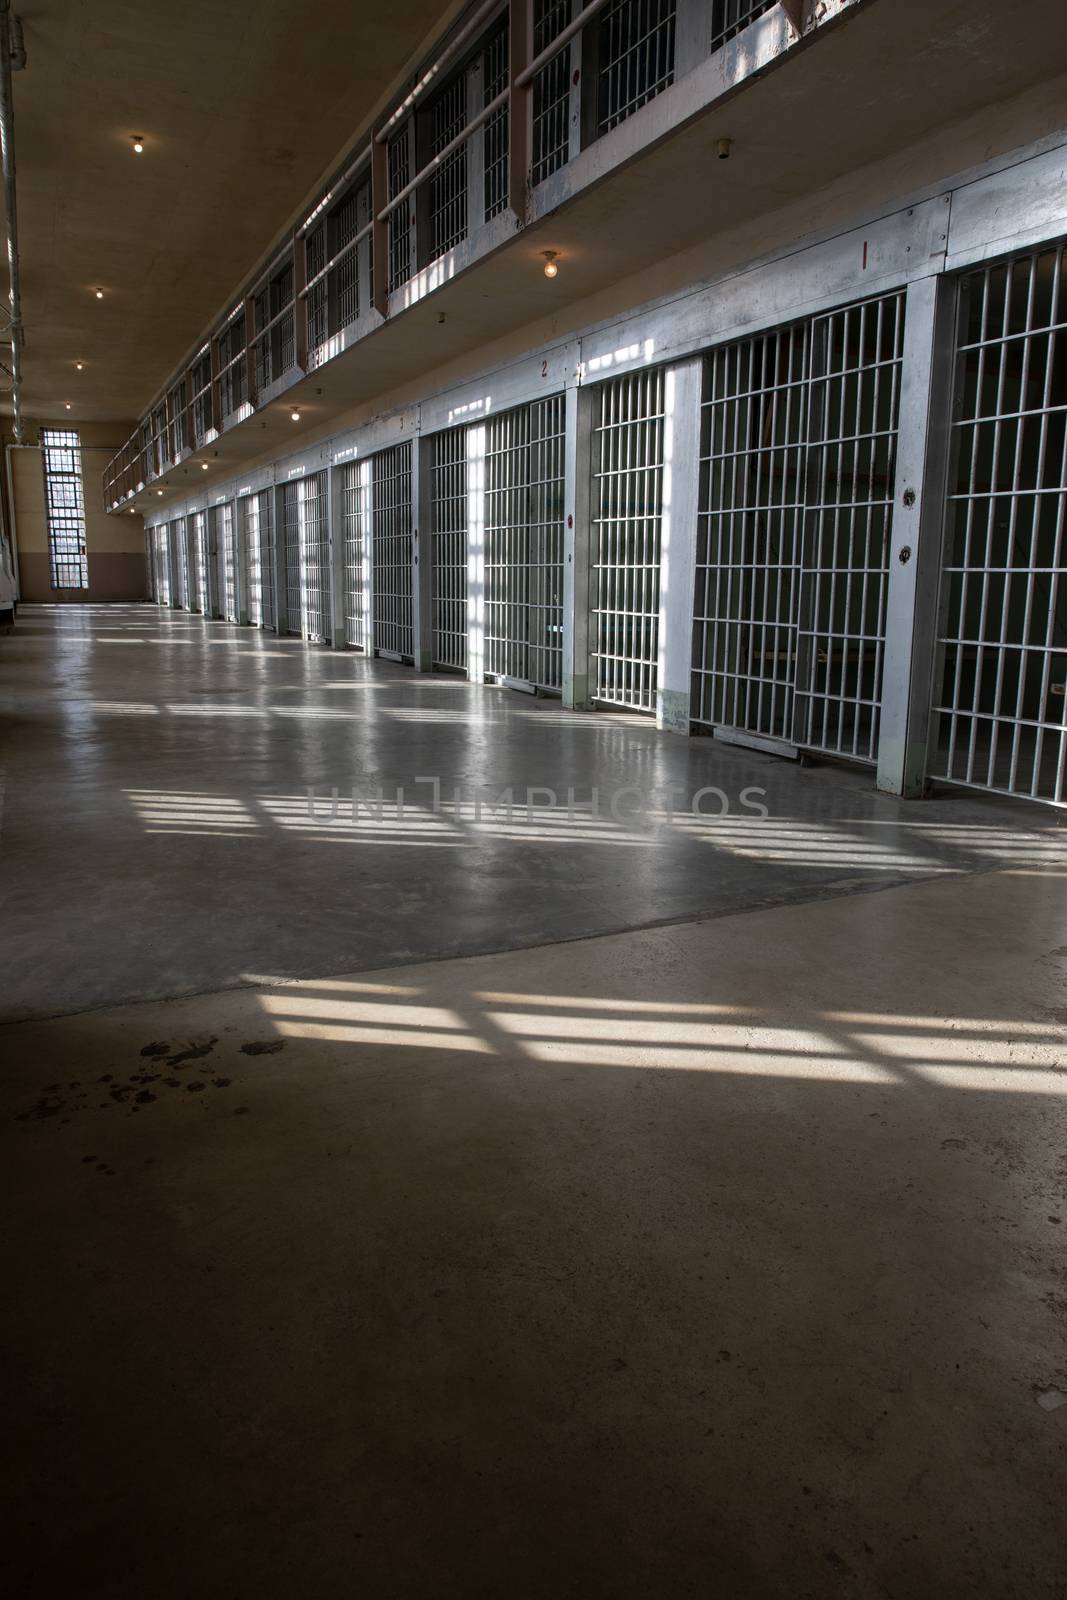 wide angle view of prison bars